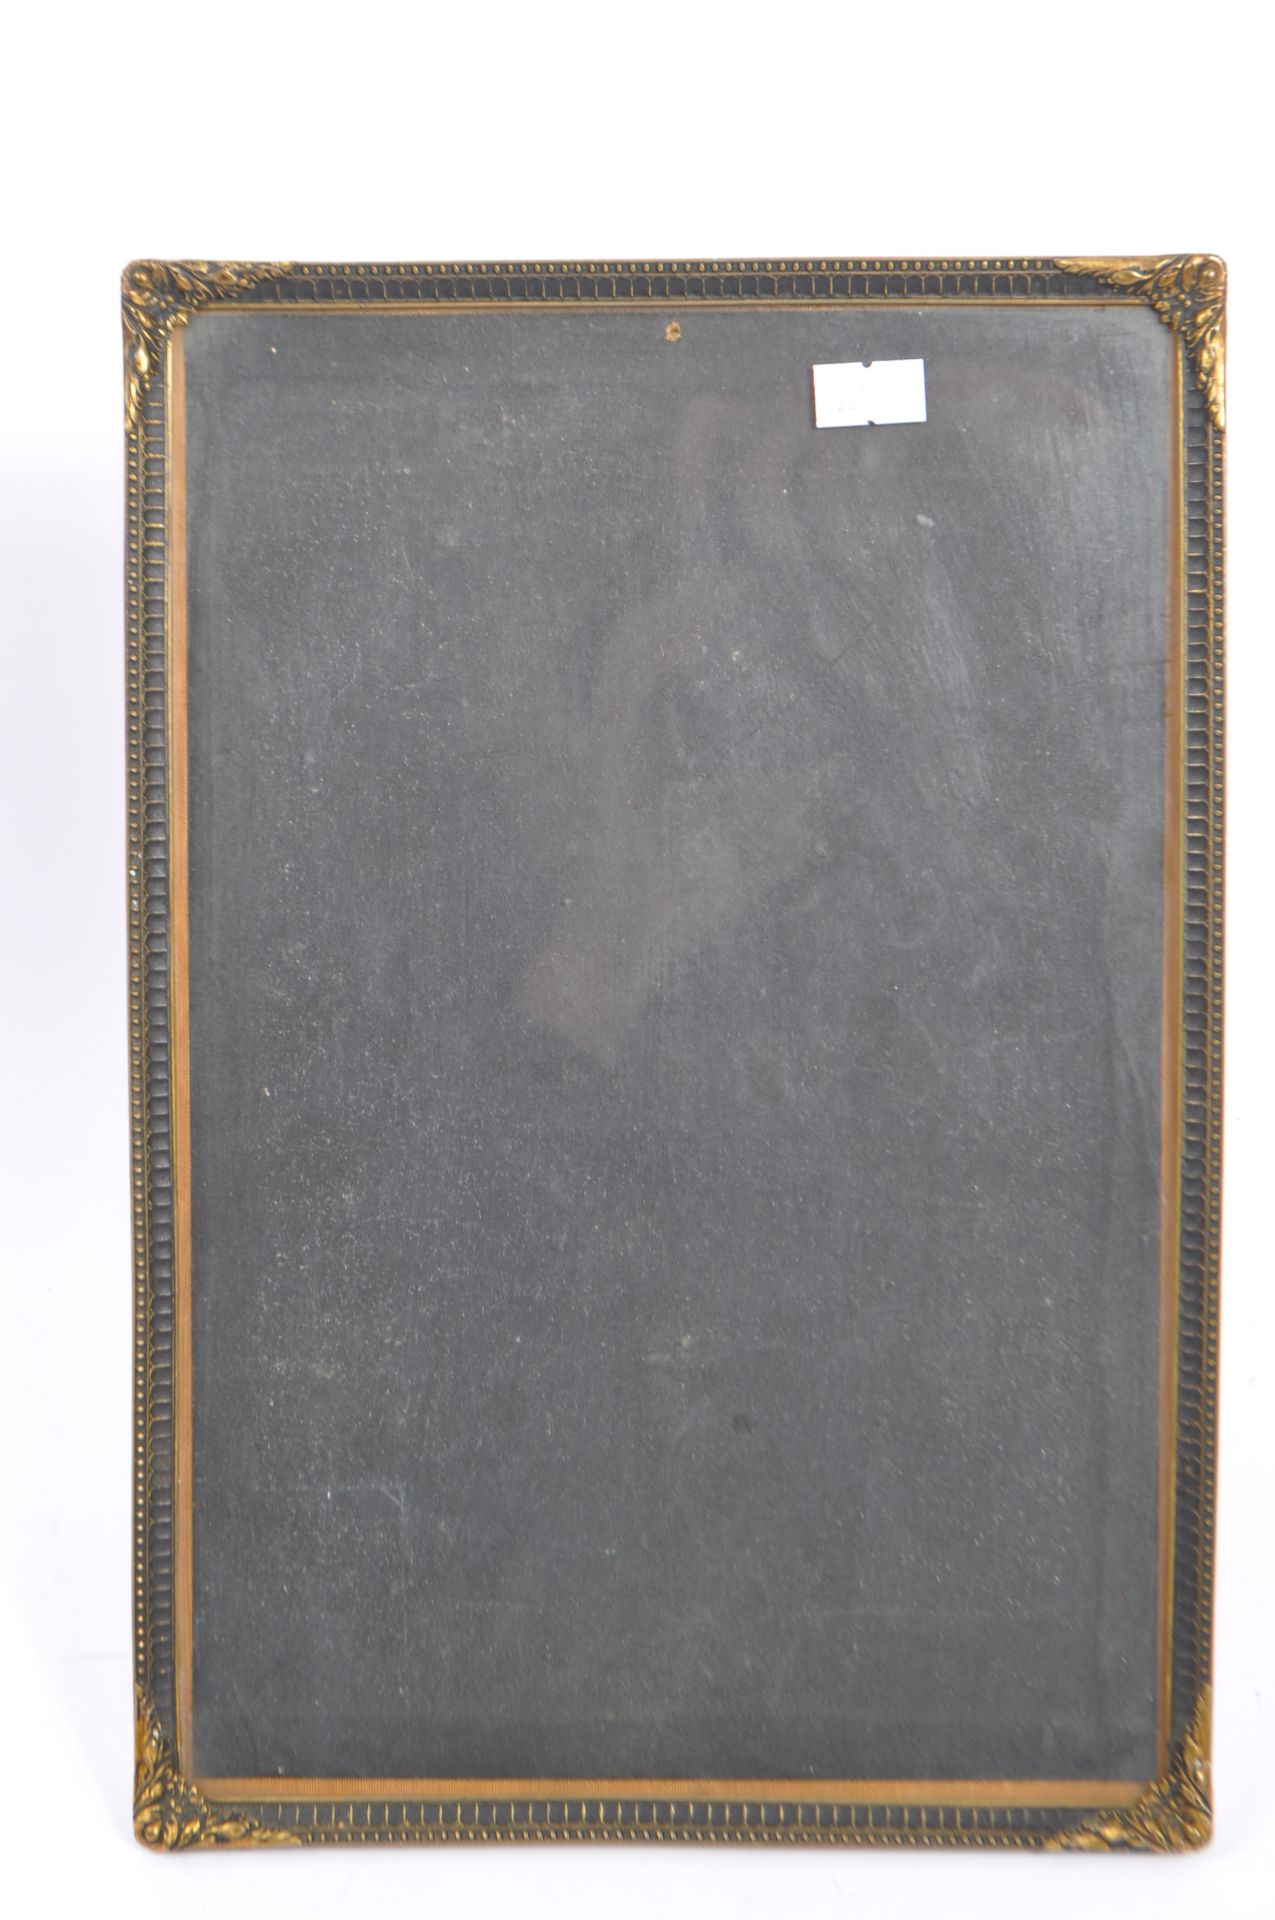 LARGE EARLY 20TH CENTURY FRENCH GILT METAL FRAME - Image 2 of 4